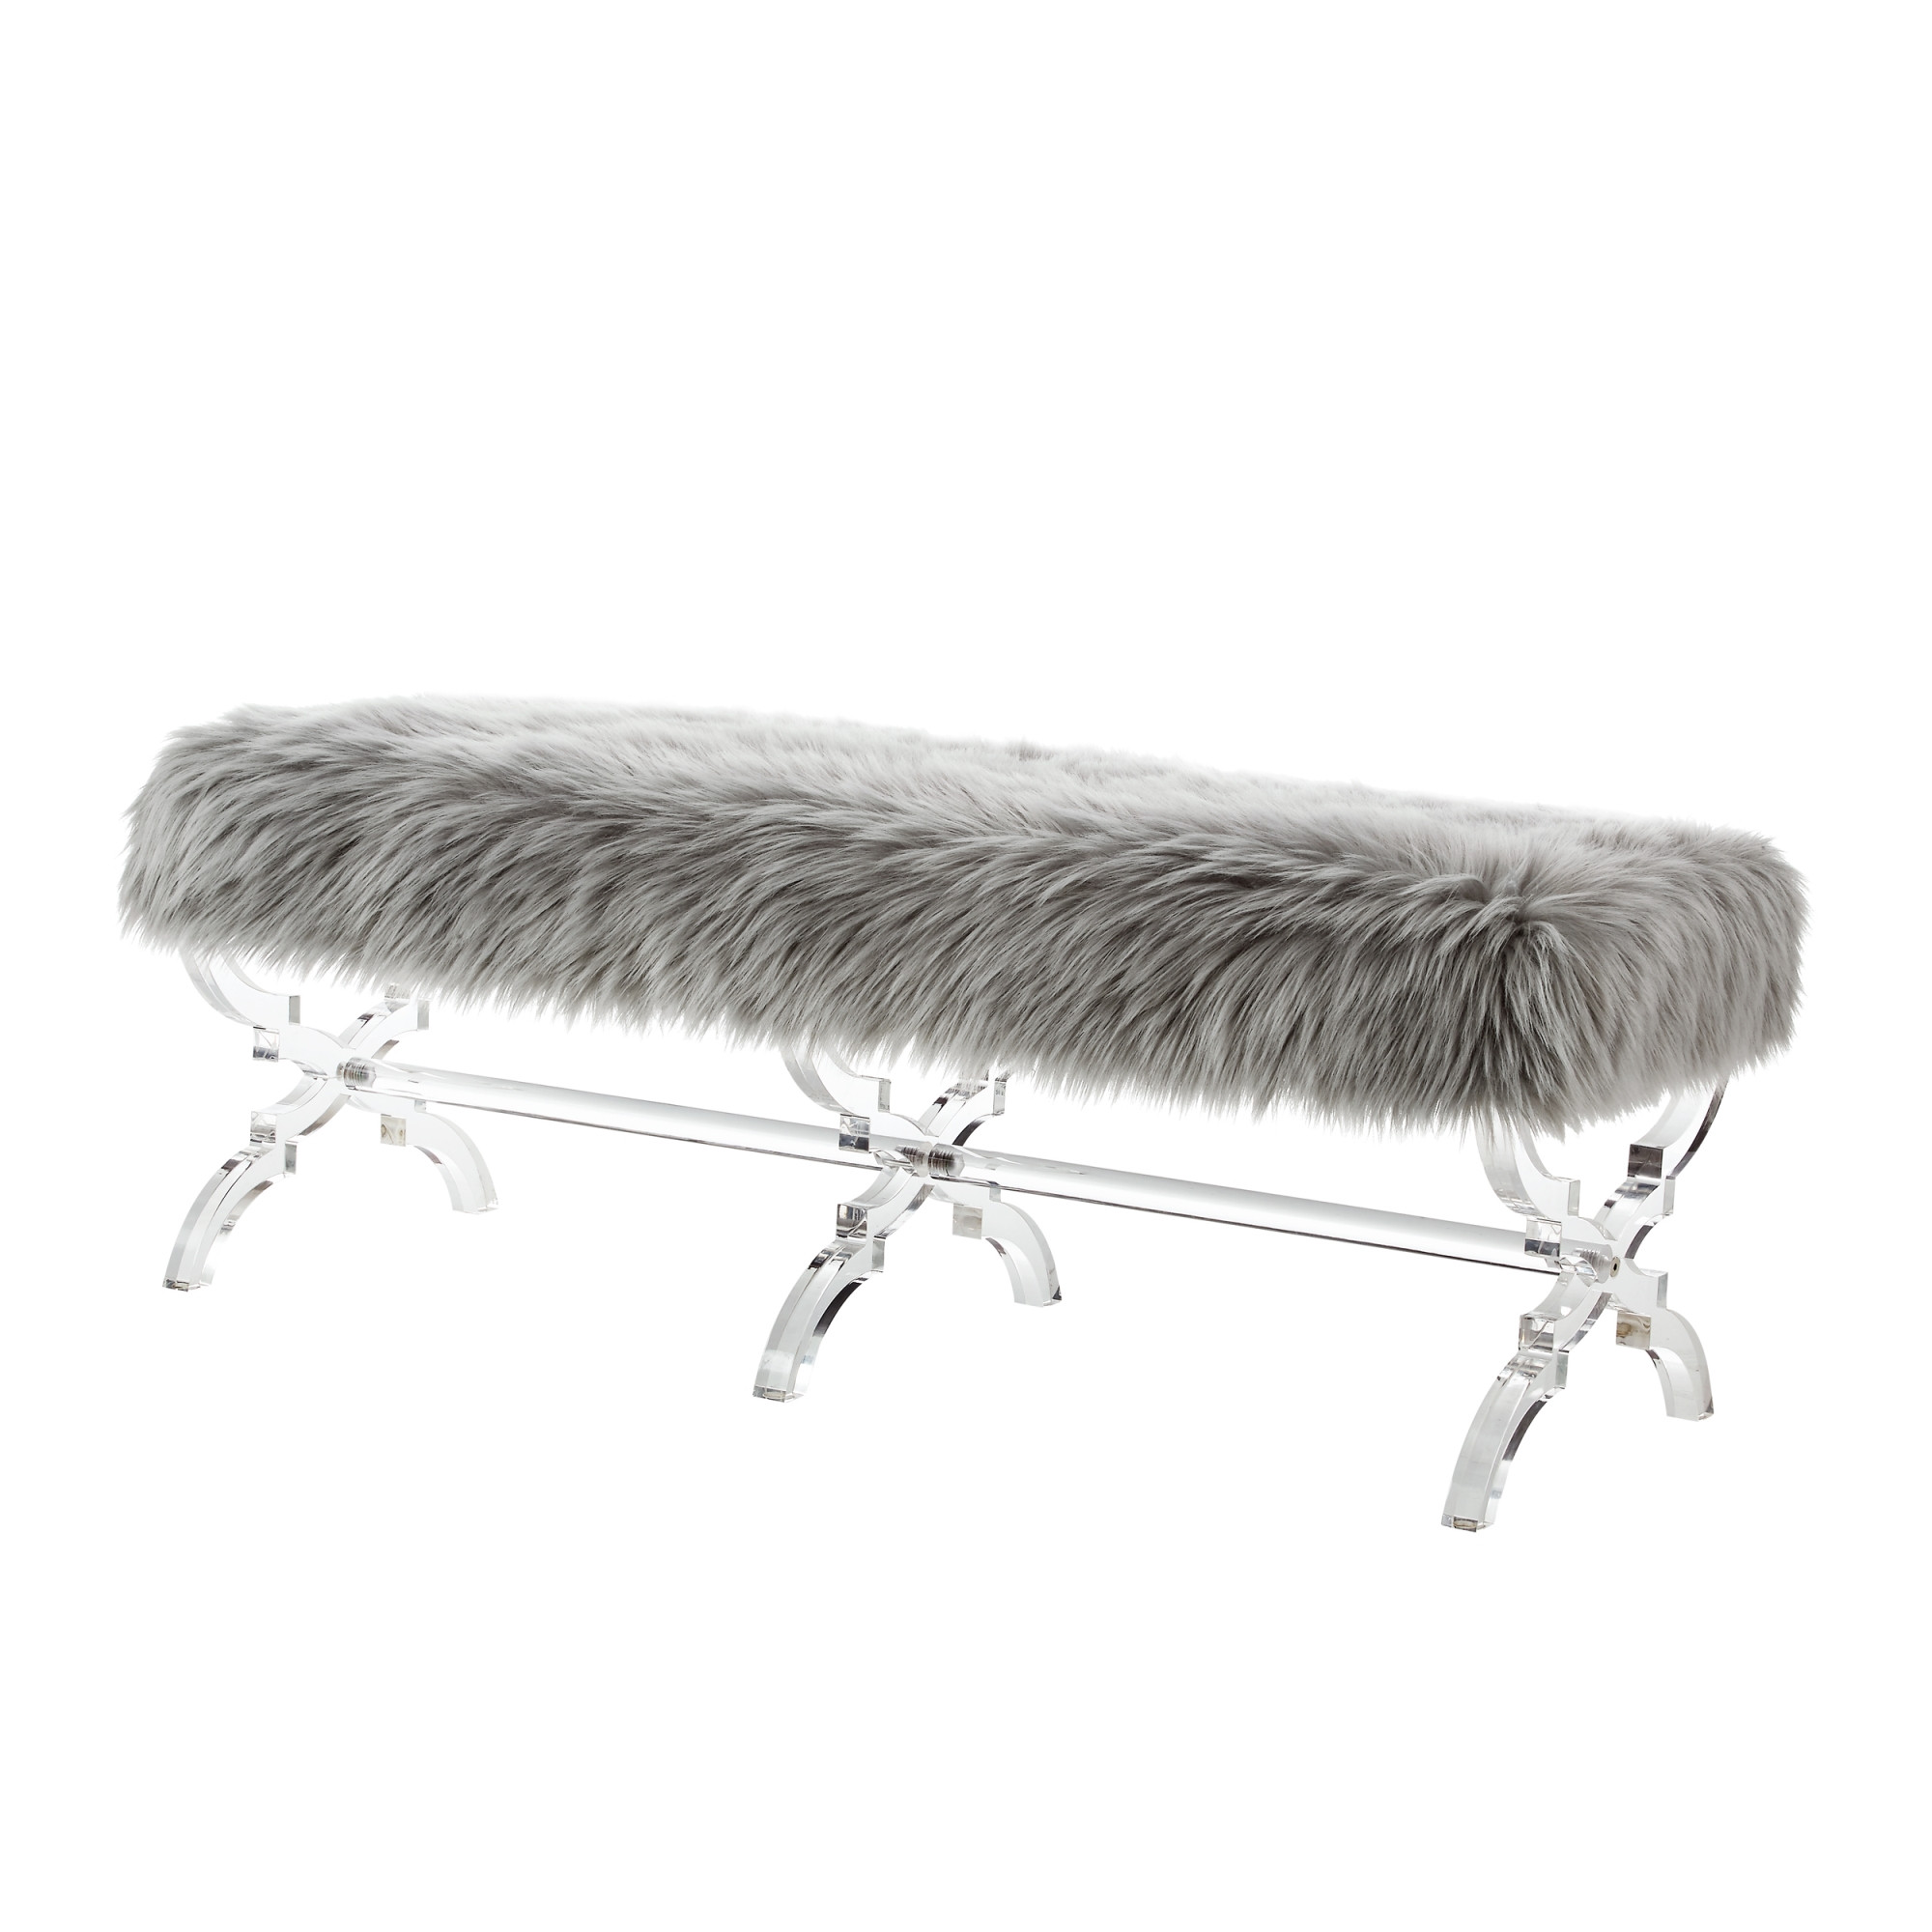 48" Gray And Clear Upholstered Faux Fur Bench-490866-1